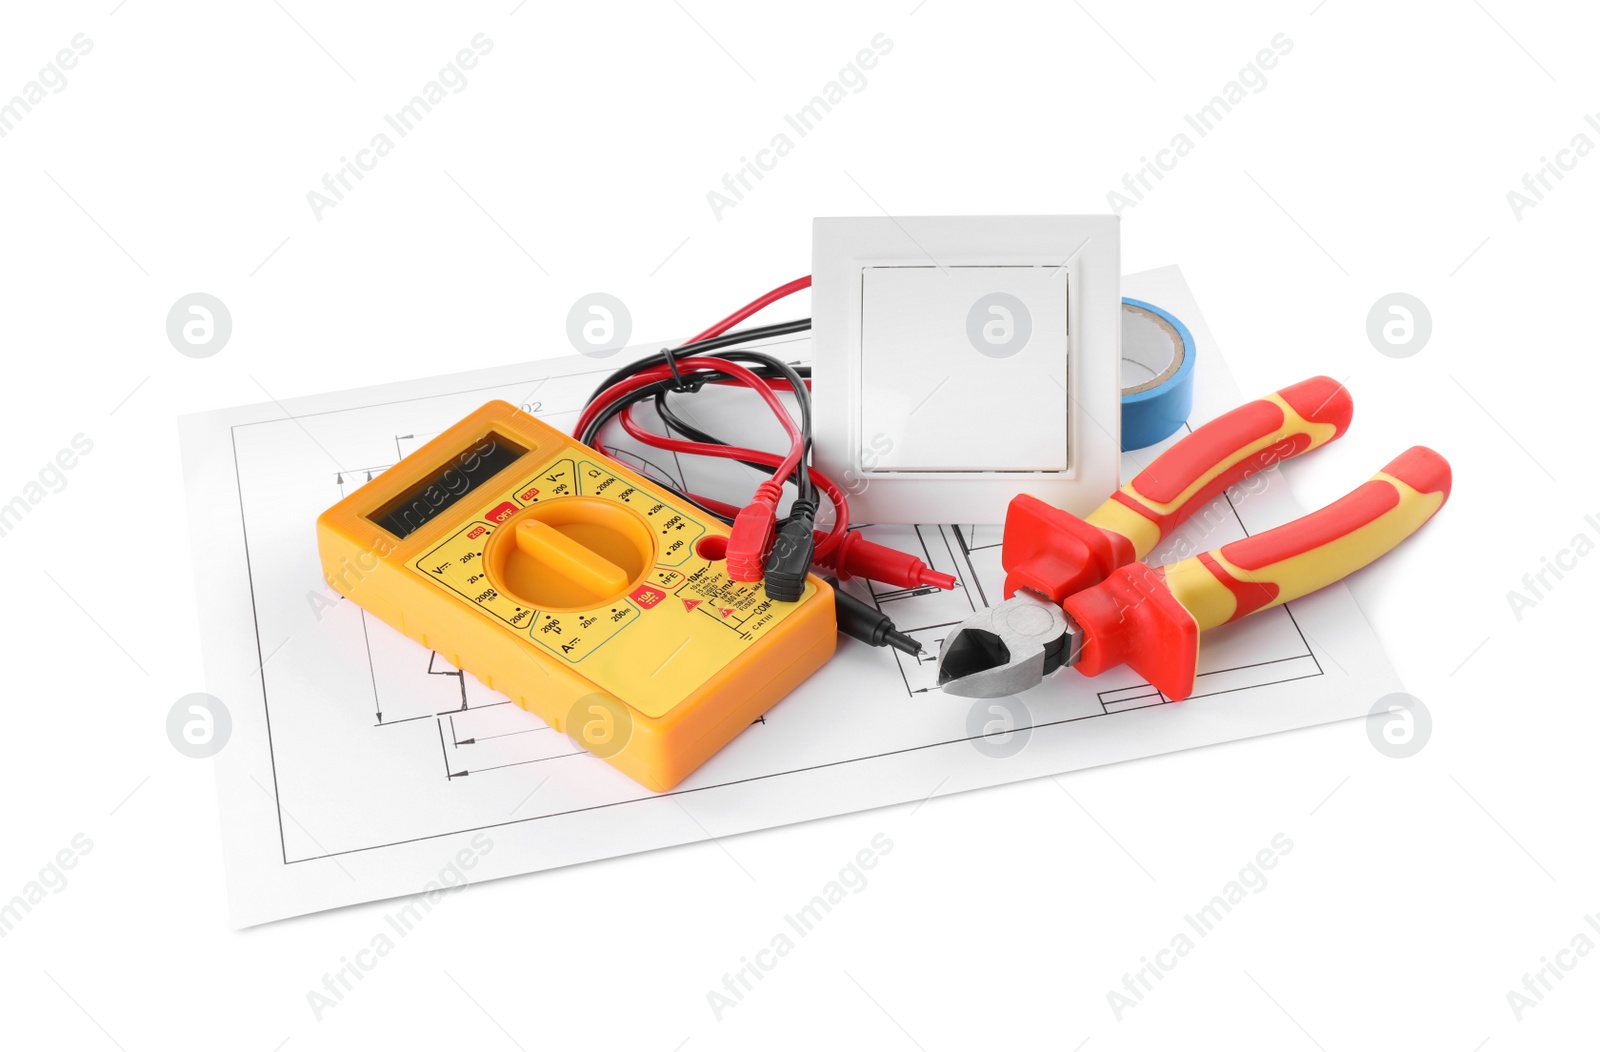 Photo of Set of electrician's tools and accessories on white background